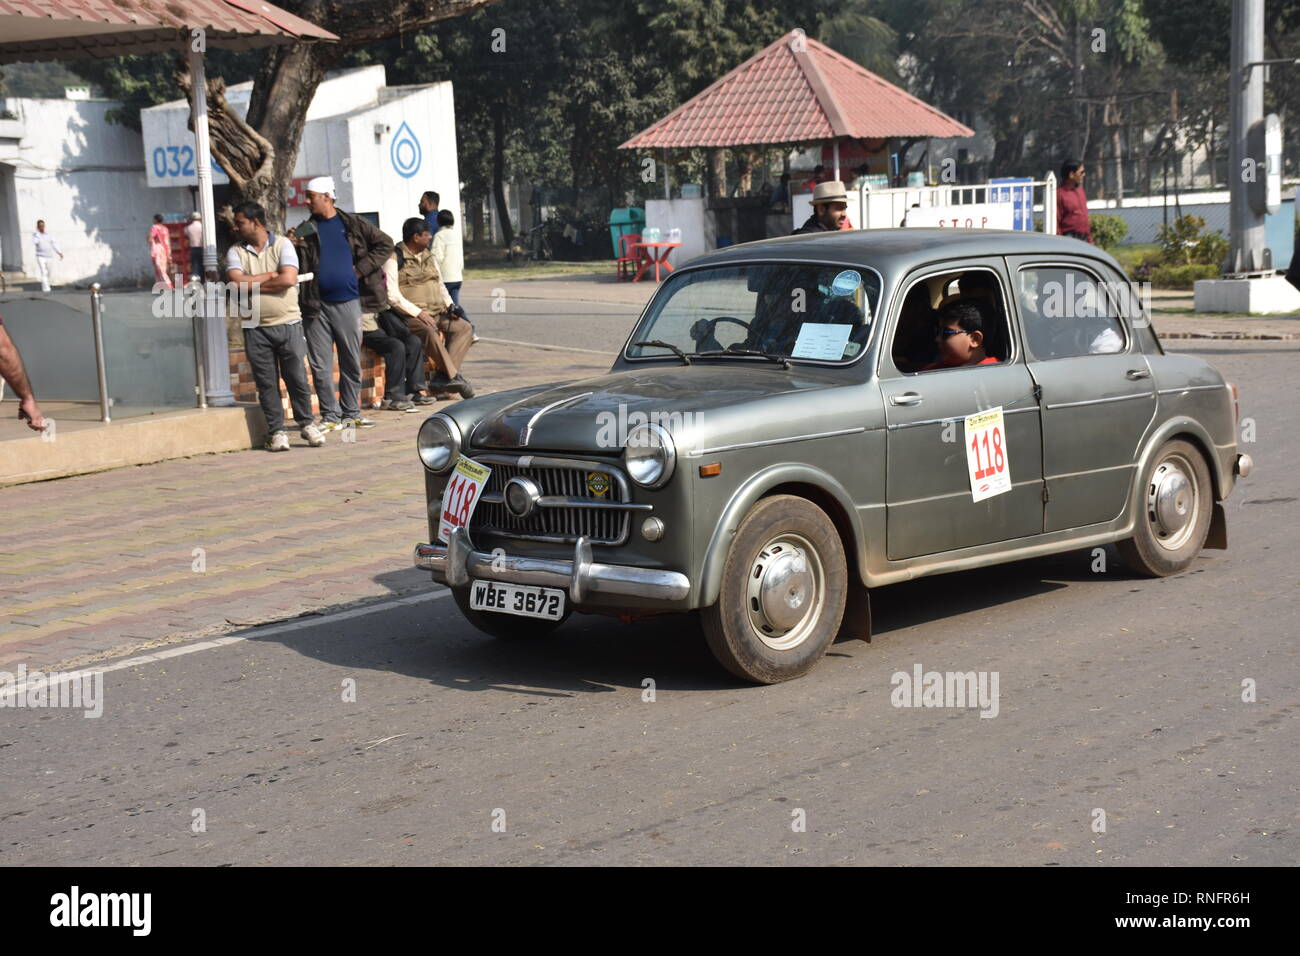 1957 Fiat Elegant car with 11 hp and 4 cylinder engine. WBE 3672 India. Stock Photo